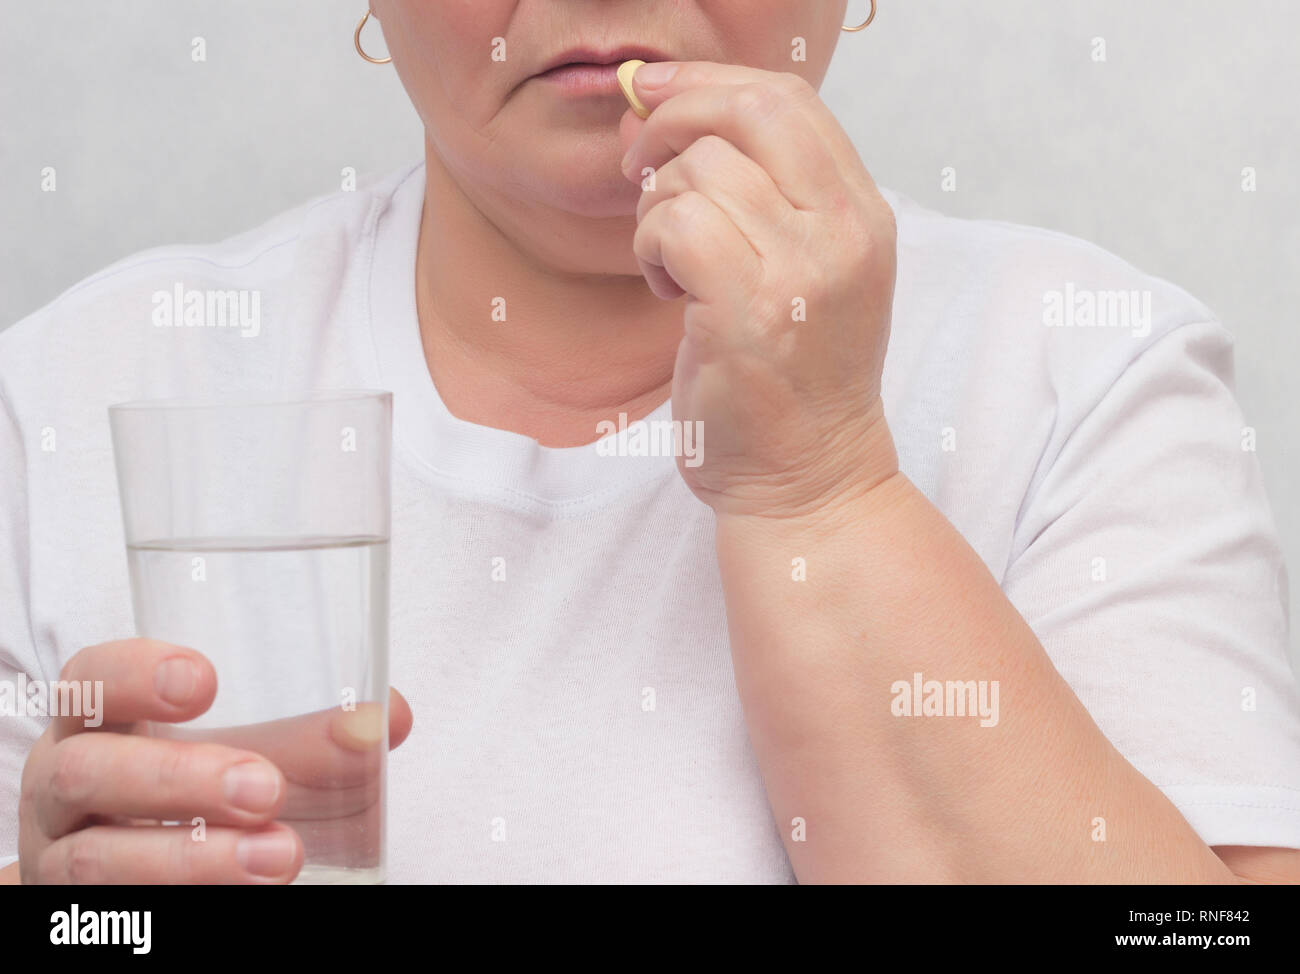 A woman drinks a hormonal pill for treating the thyroid gland, eliminating nodules and normalizing hormones. treatment, close-up, Hypothyroidism, Thyr Stock Photo